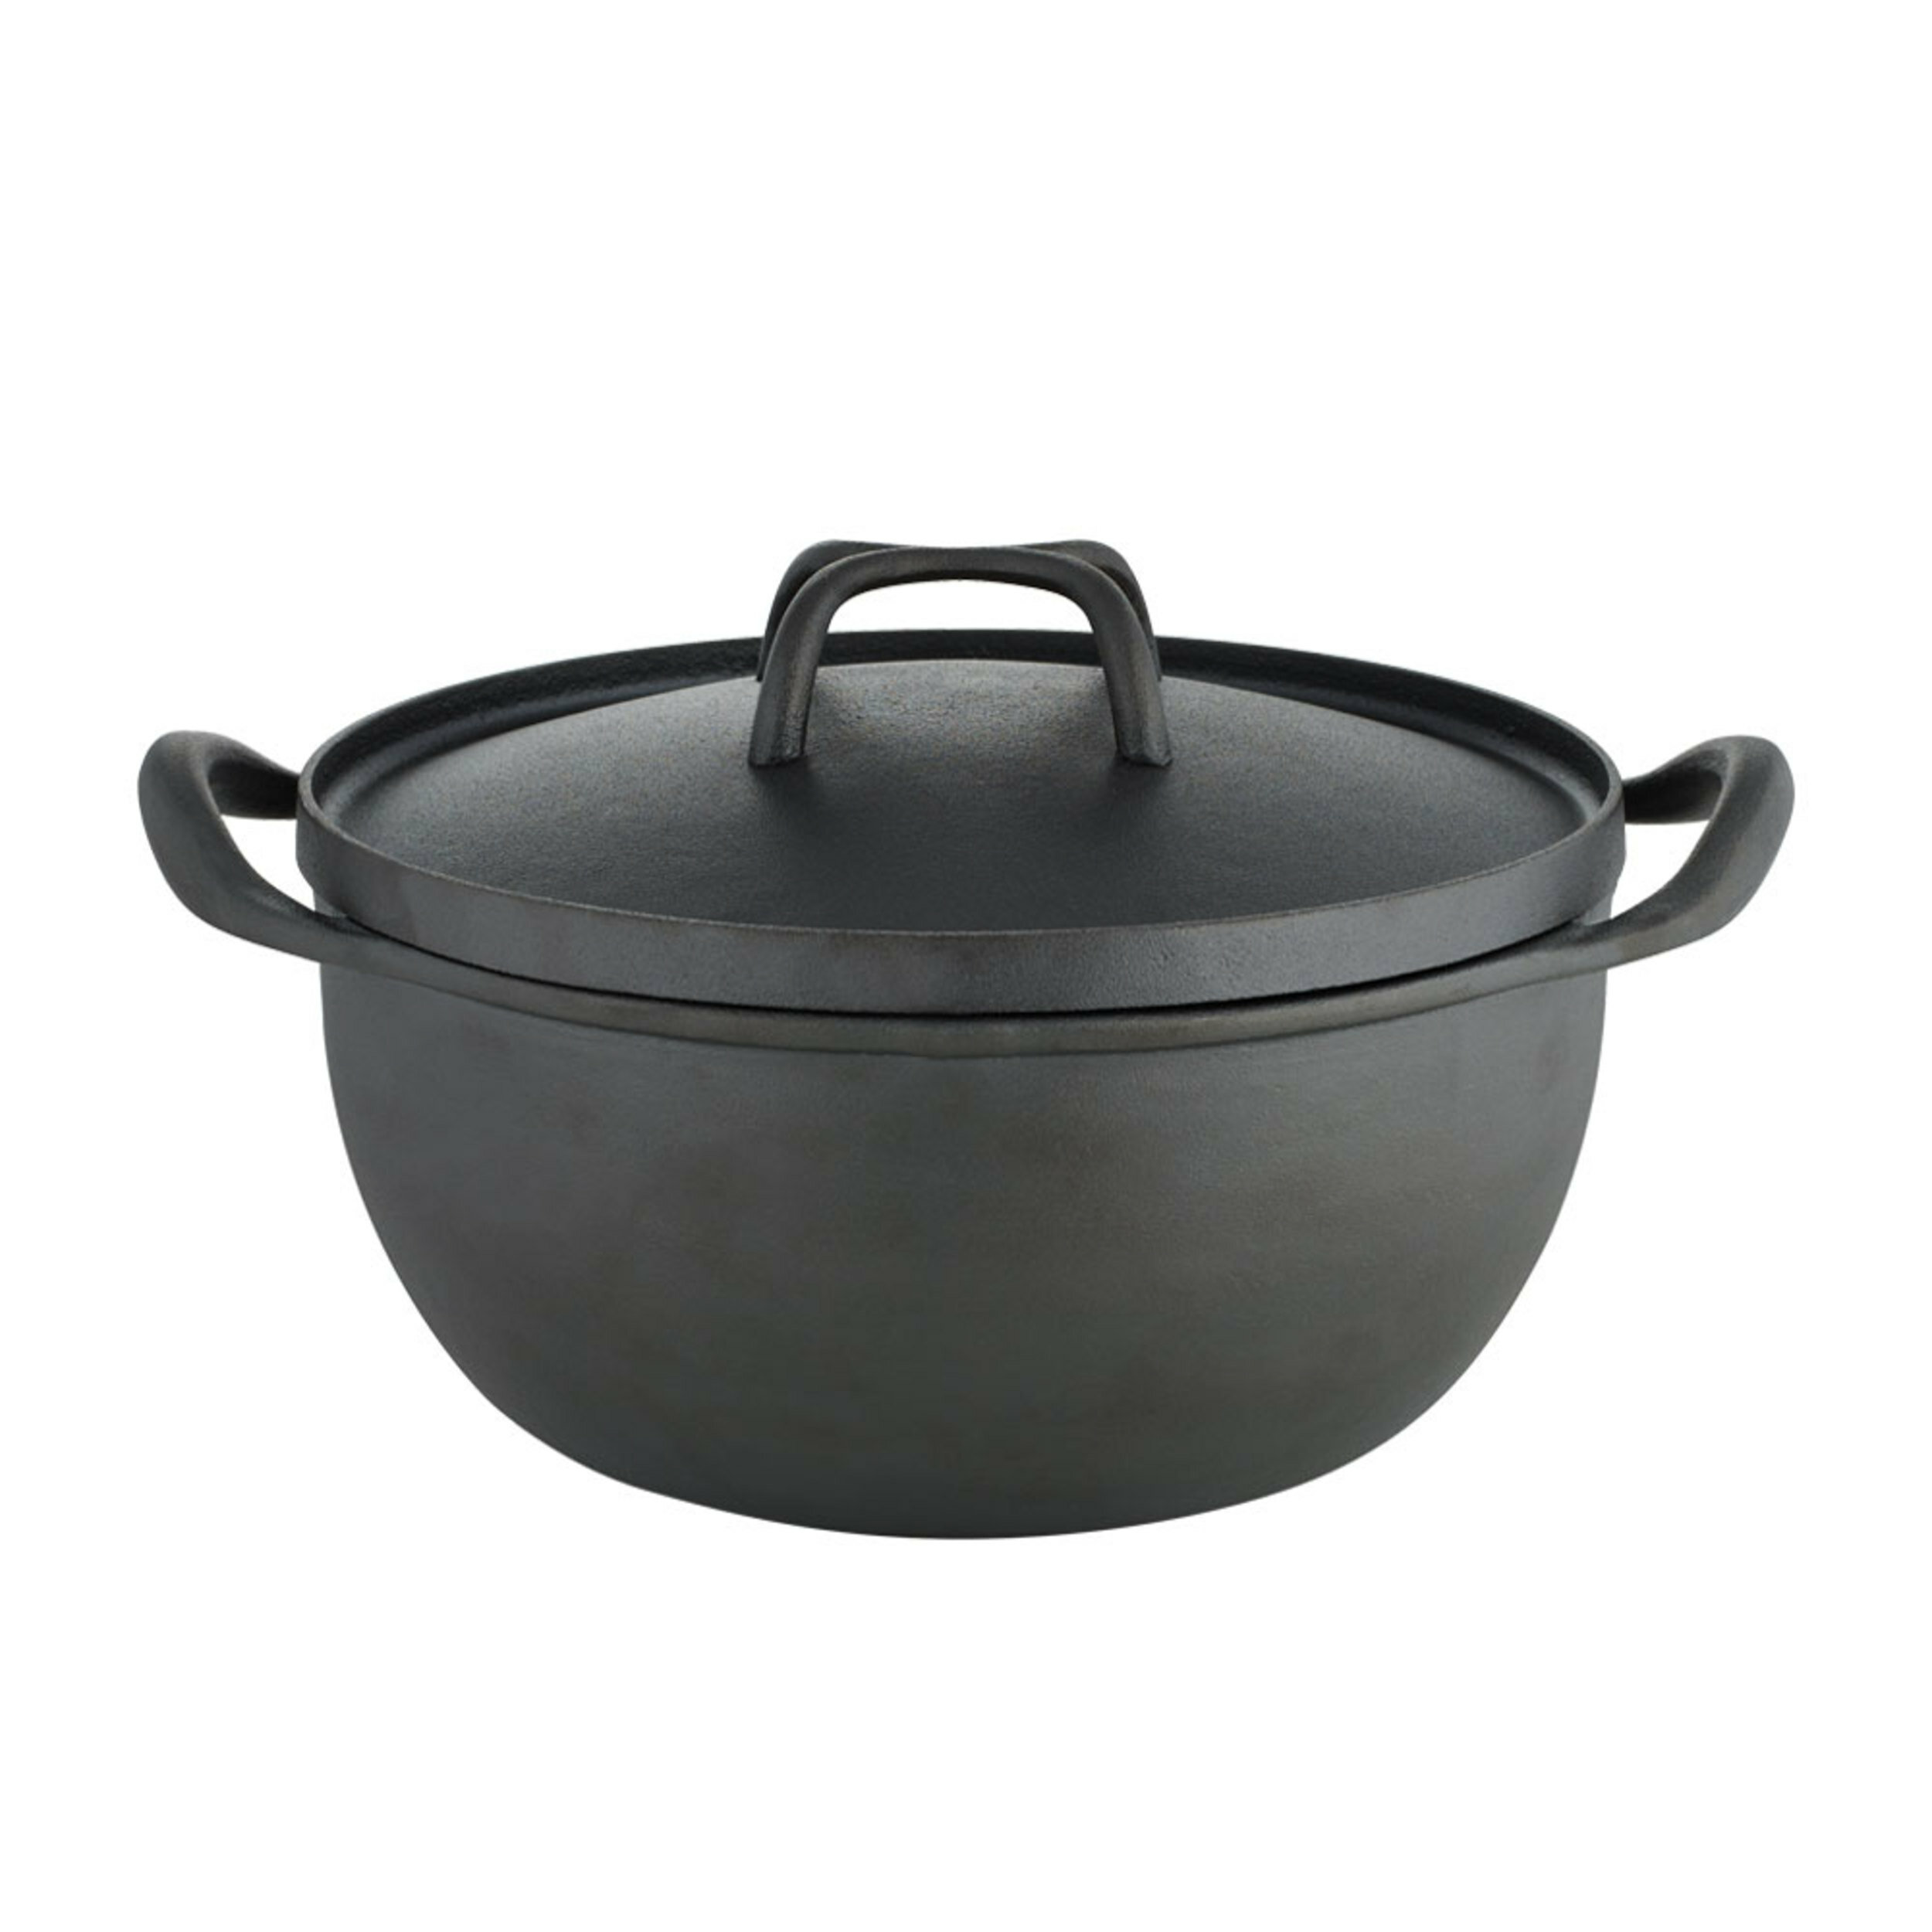 Cast Iron Dutch Oven 6 Quart Outdoor Cooking Camping Cooker Heavy Wire Handle